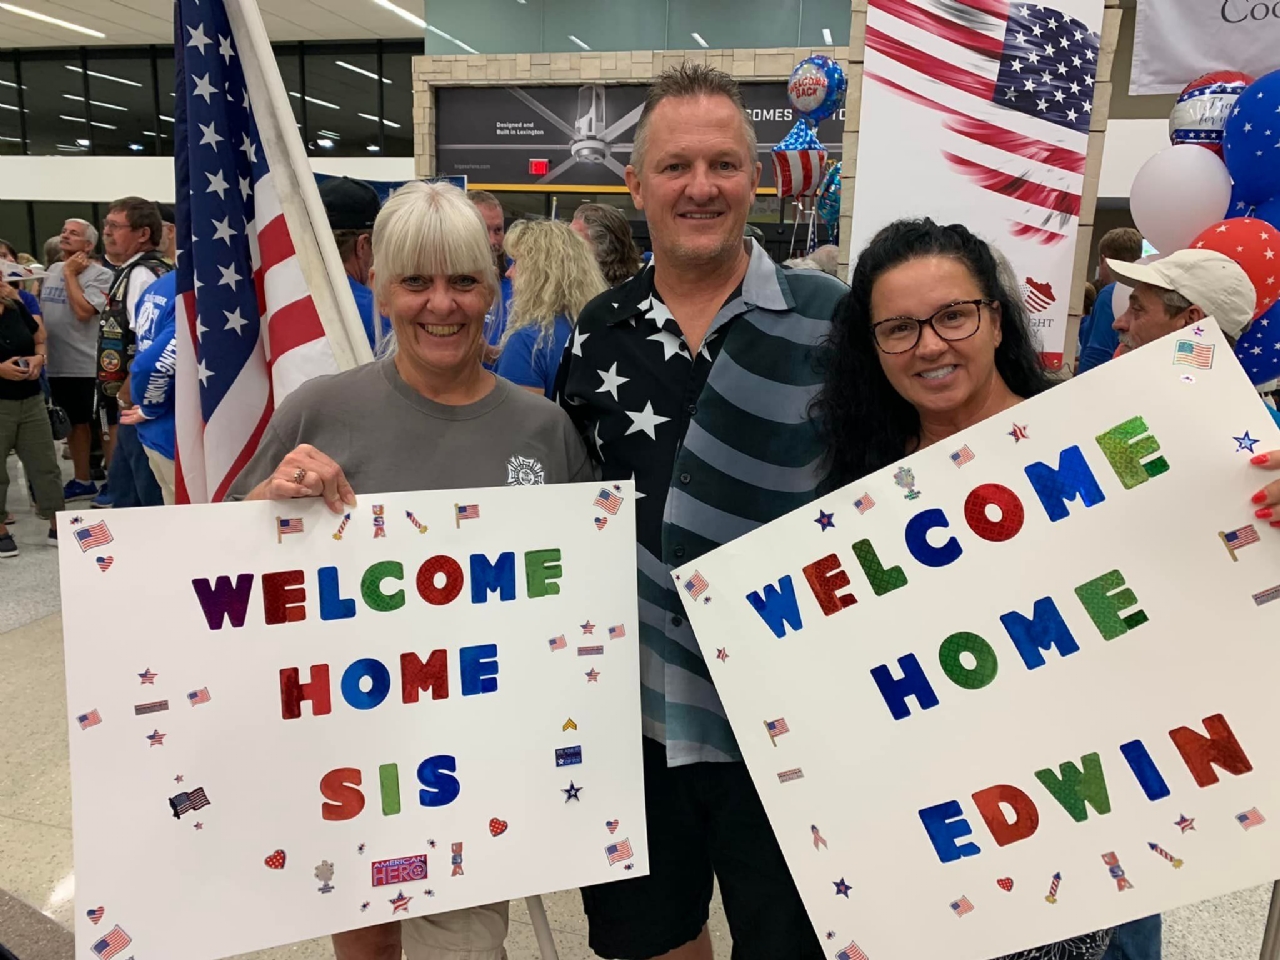 Welcome home celebration at the airport.